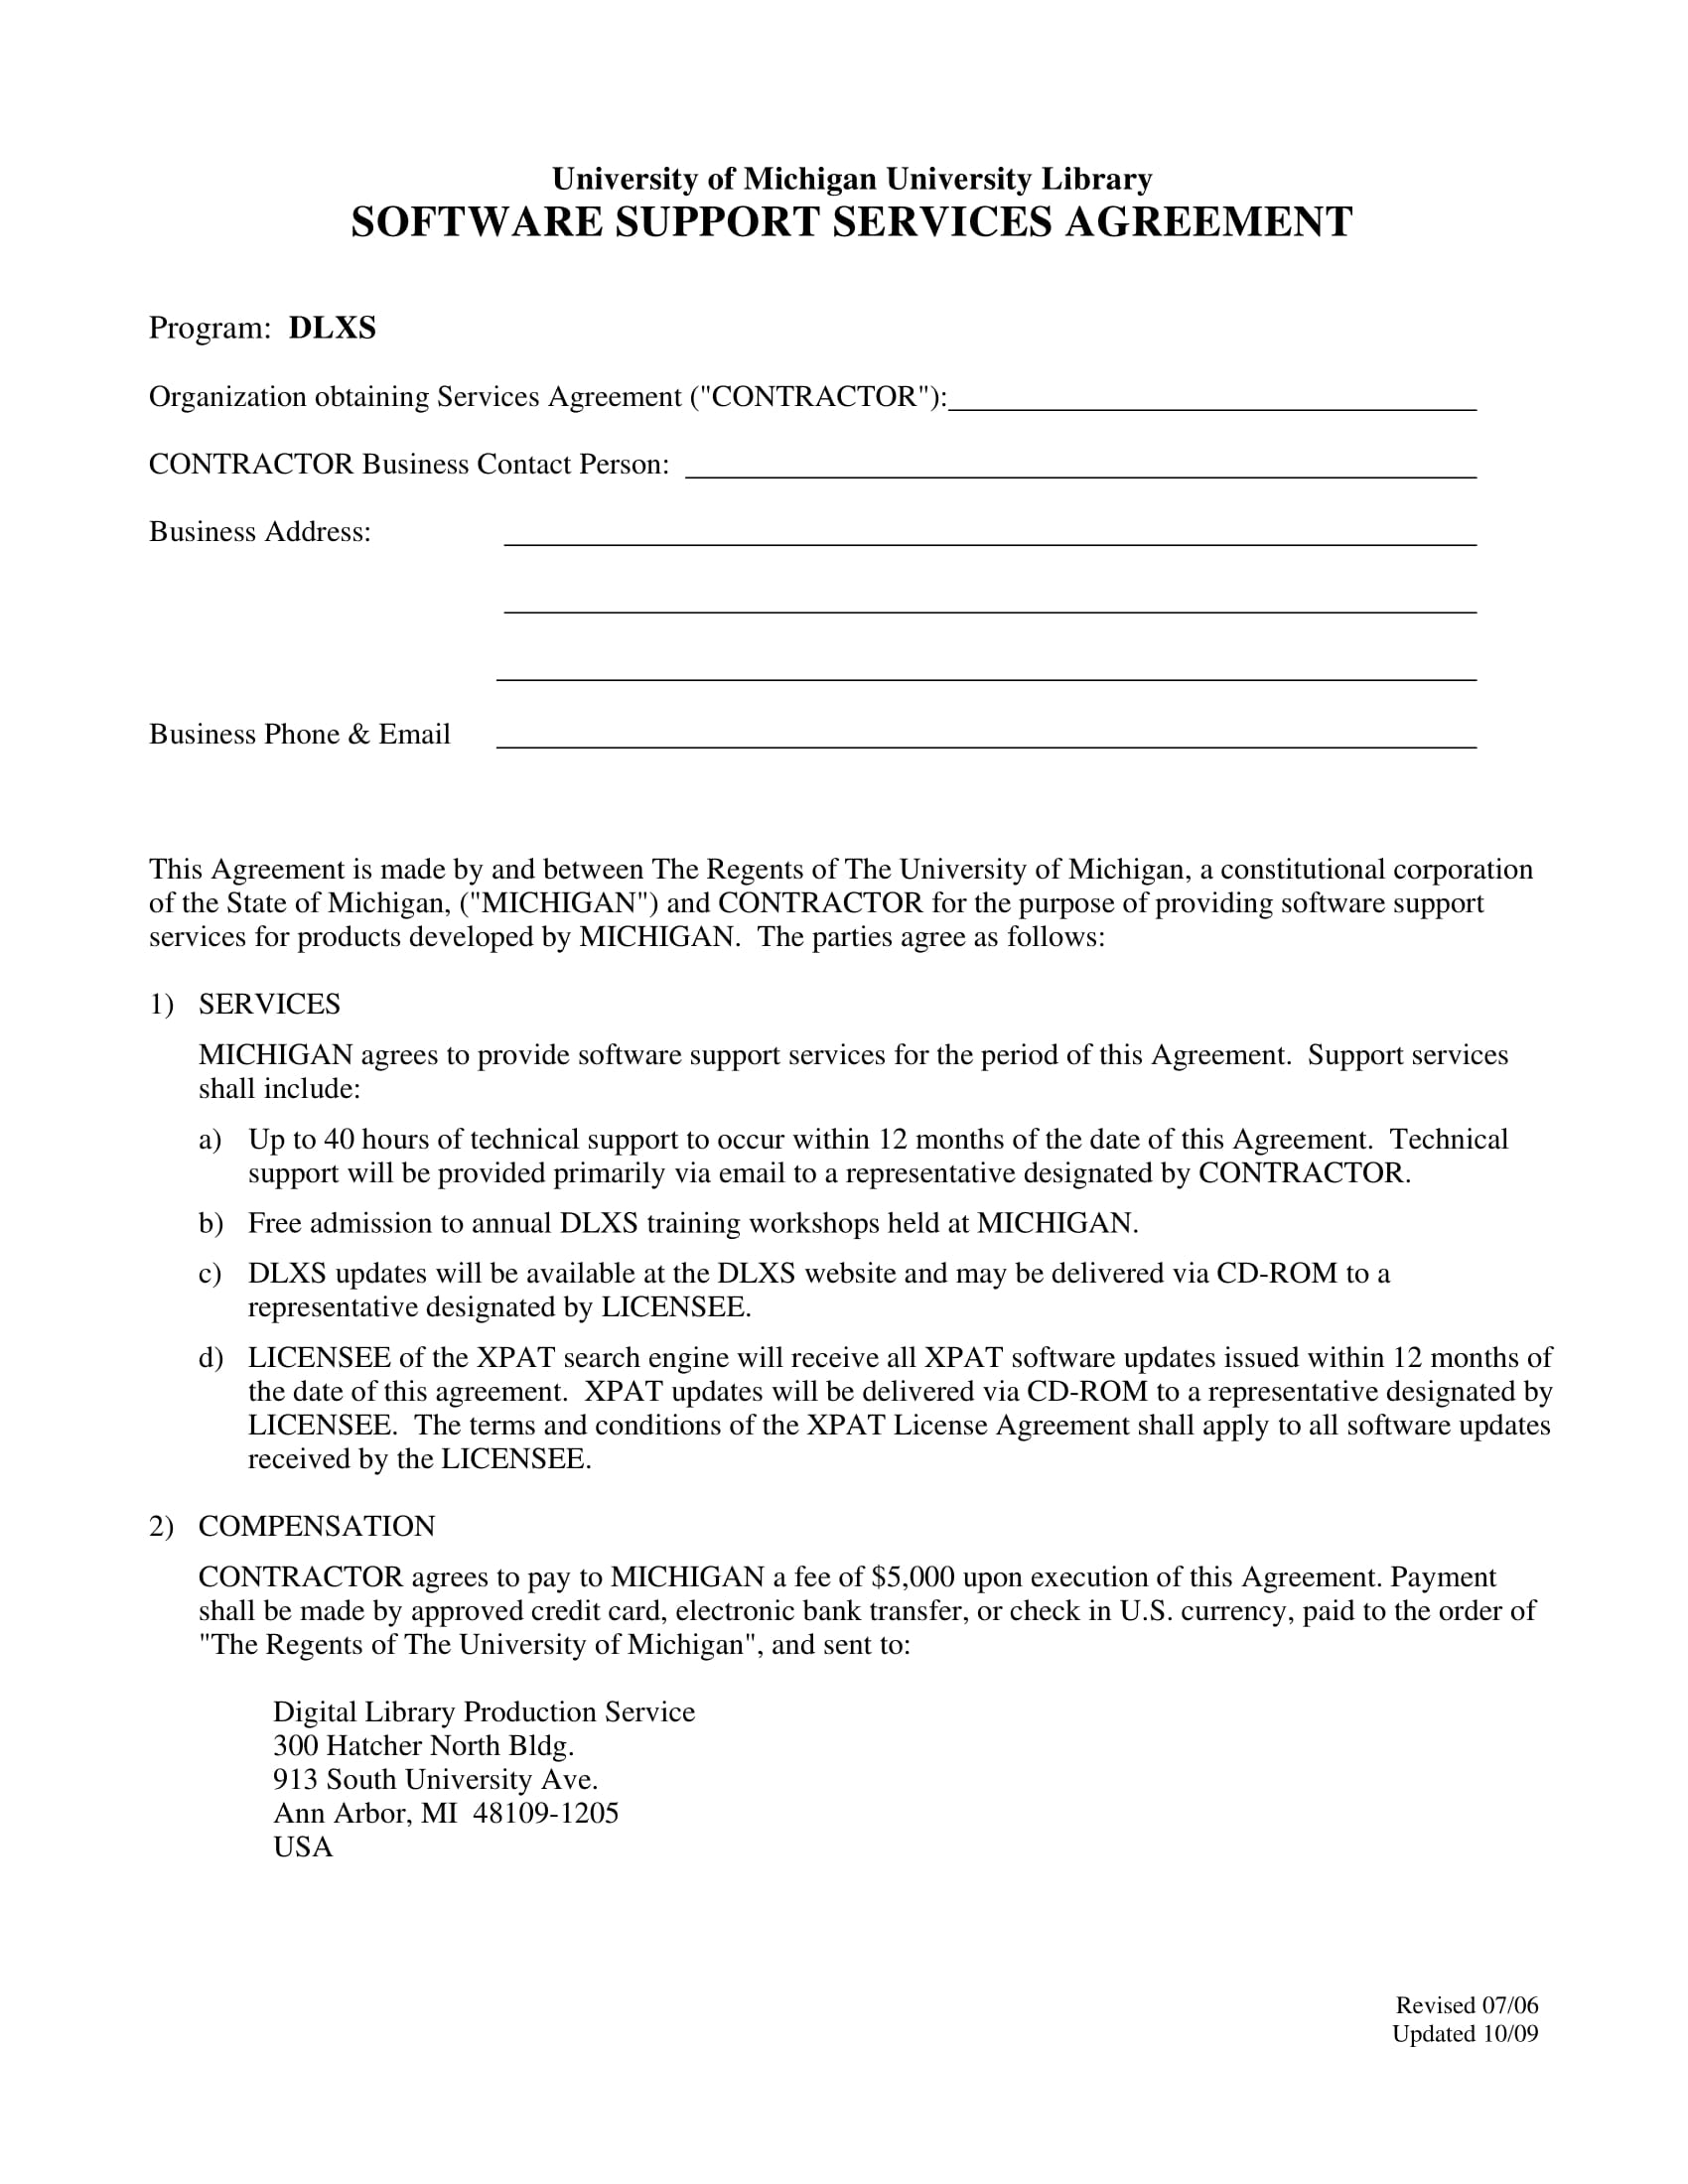 Software Agreement Contract 4 Software Agreement Contract Forms Pdf Doc